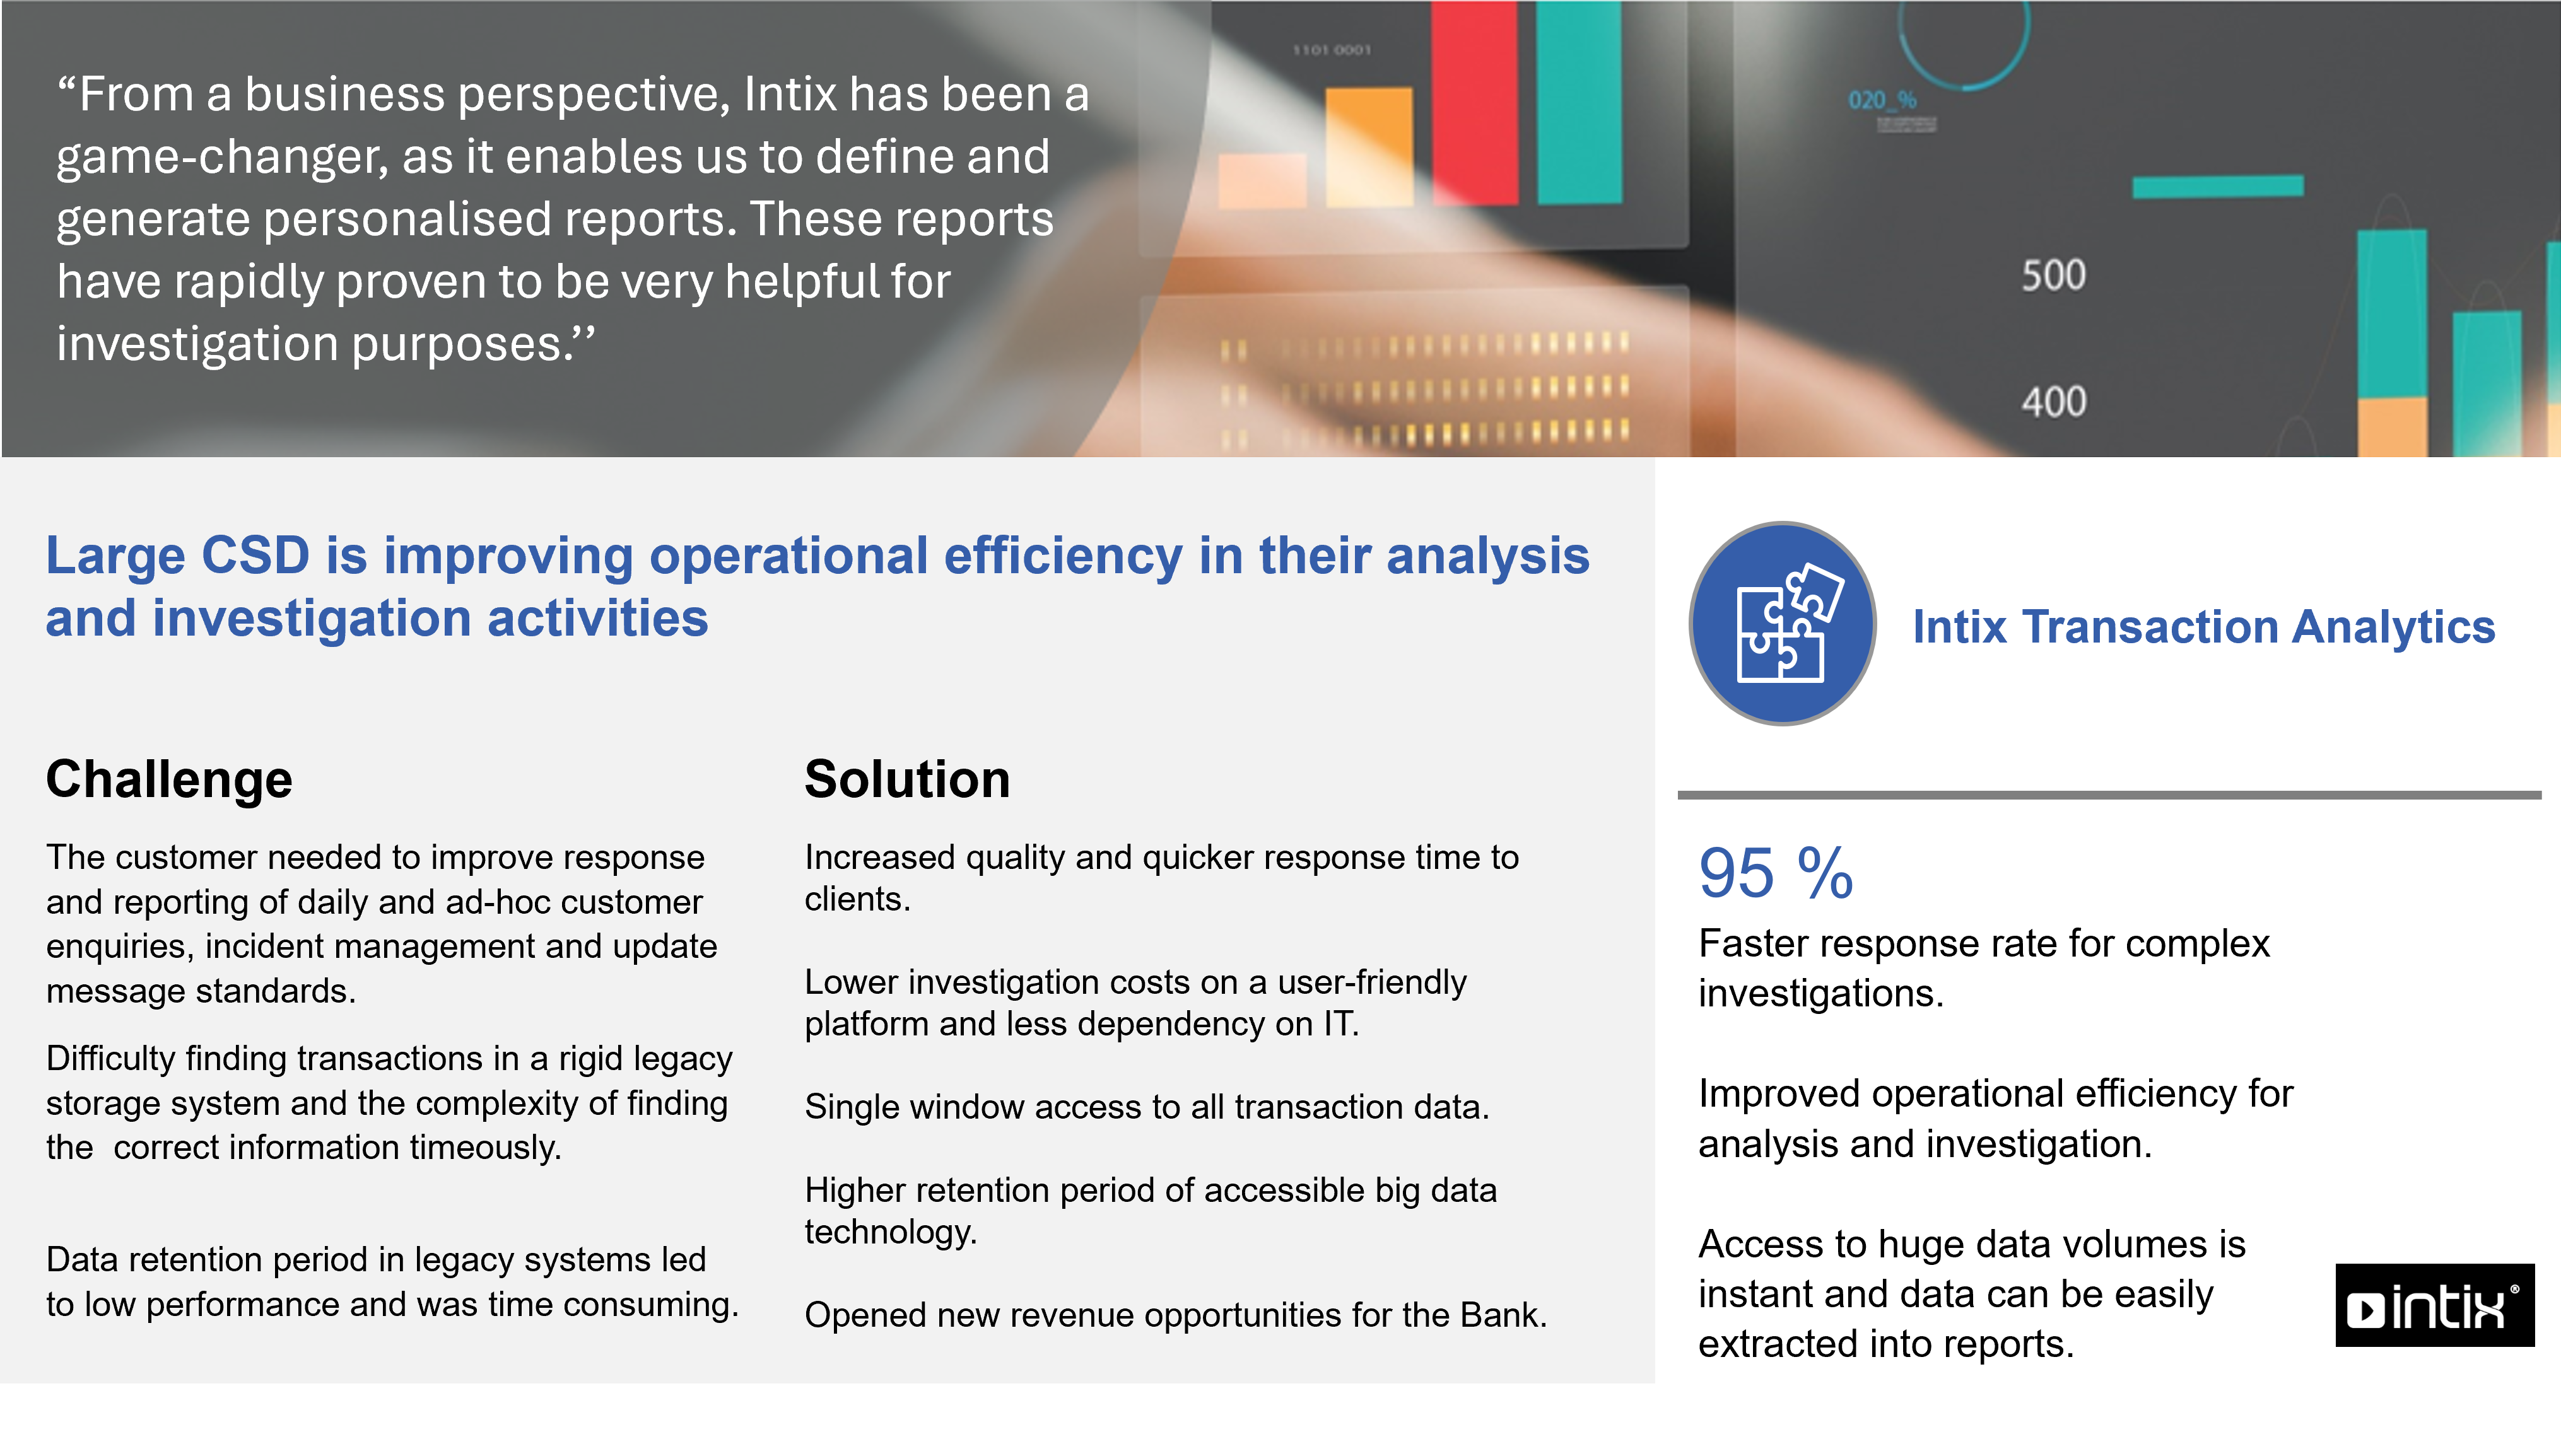 Infographic illustrating how intix transaction analytics improves operational efficiency and investigation activities in customer data science with challenges, solutions, and performance metrics.